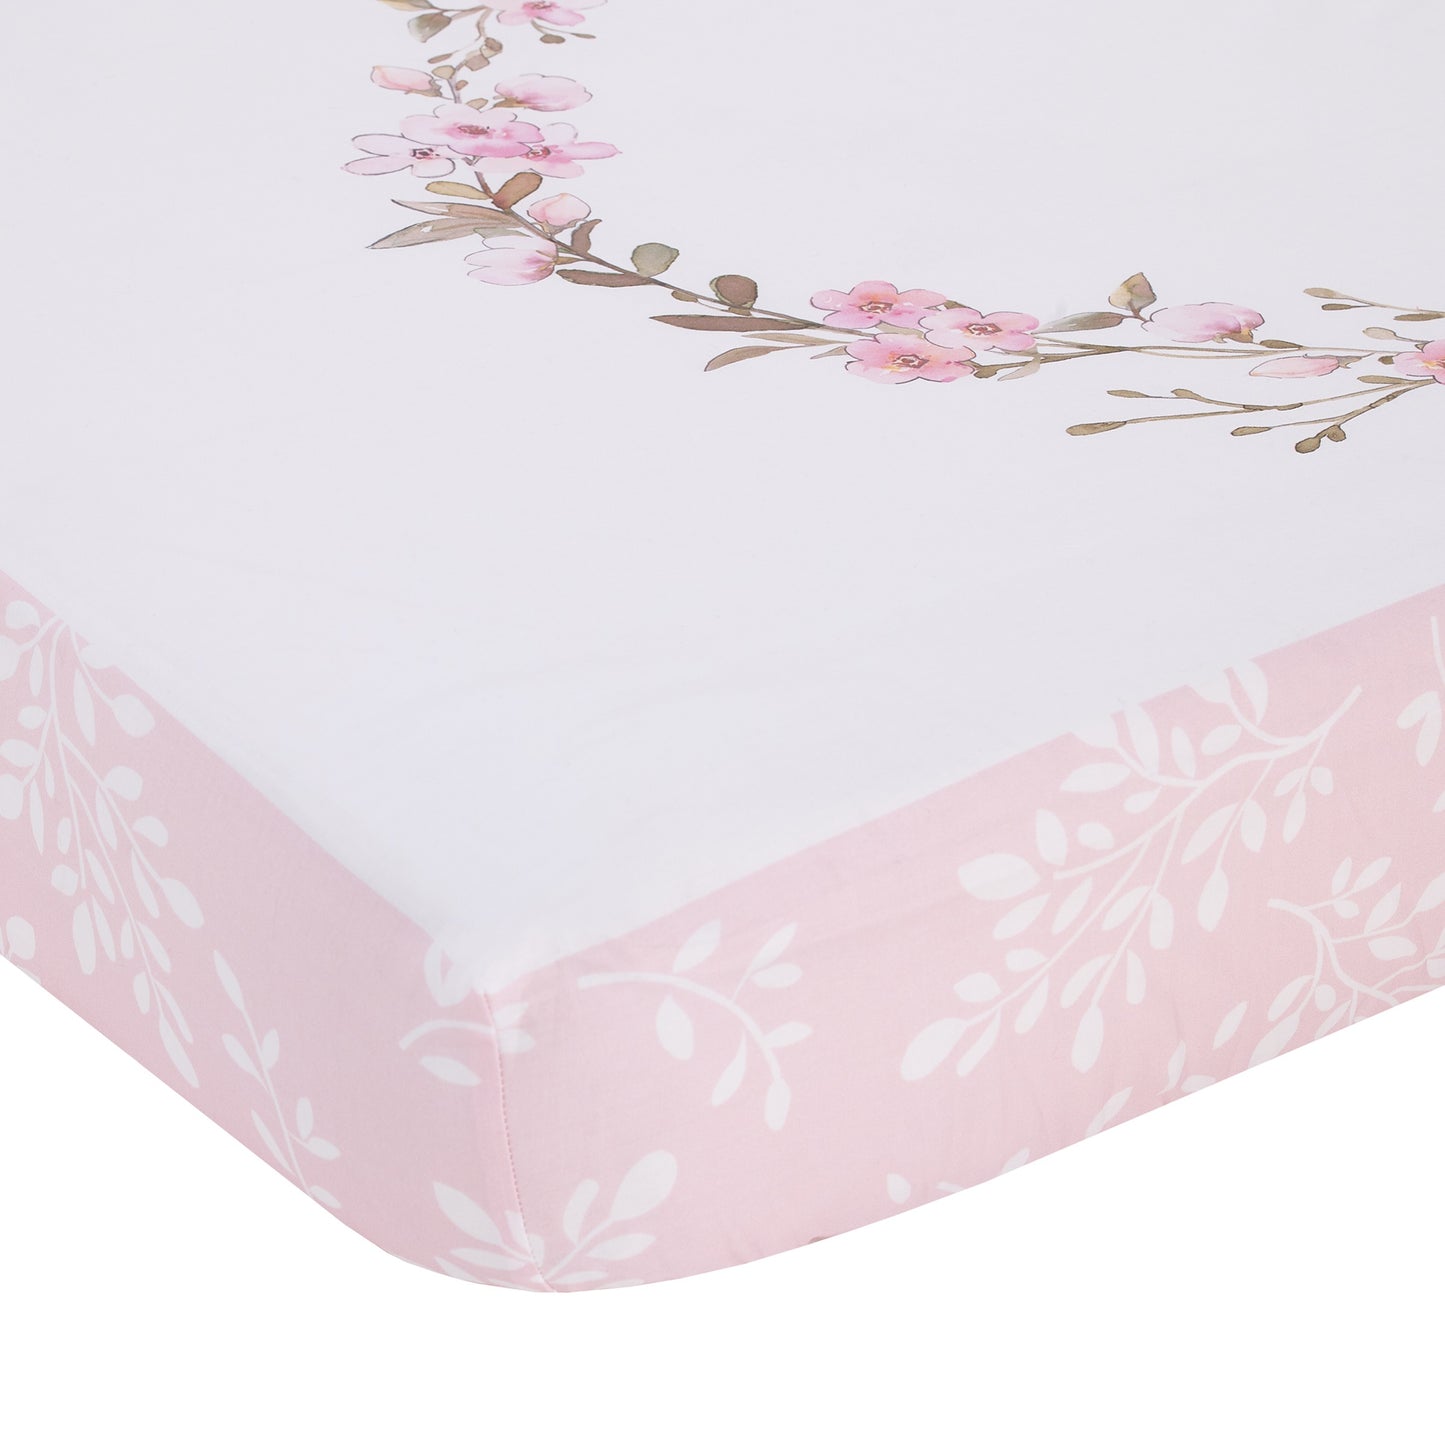 NoJo Flower Fairy Pink, White, and Taupe She Believed, She Could, So She Did 100% Cotton Nursery Photo Op Fitted Crib Sheet